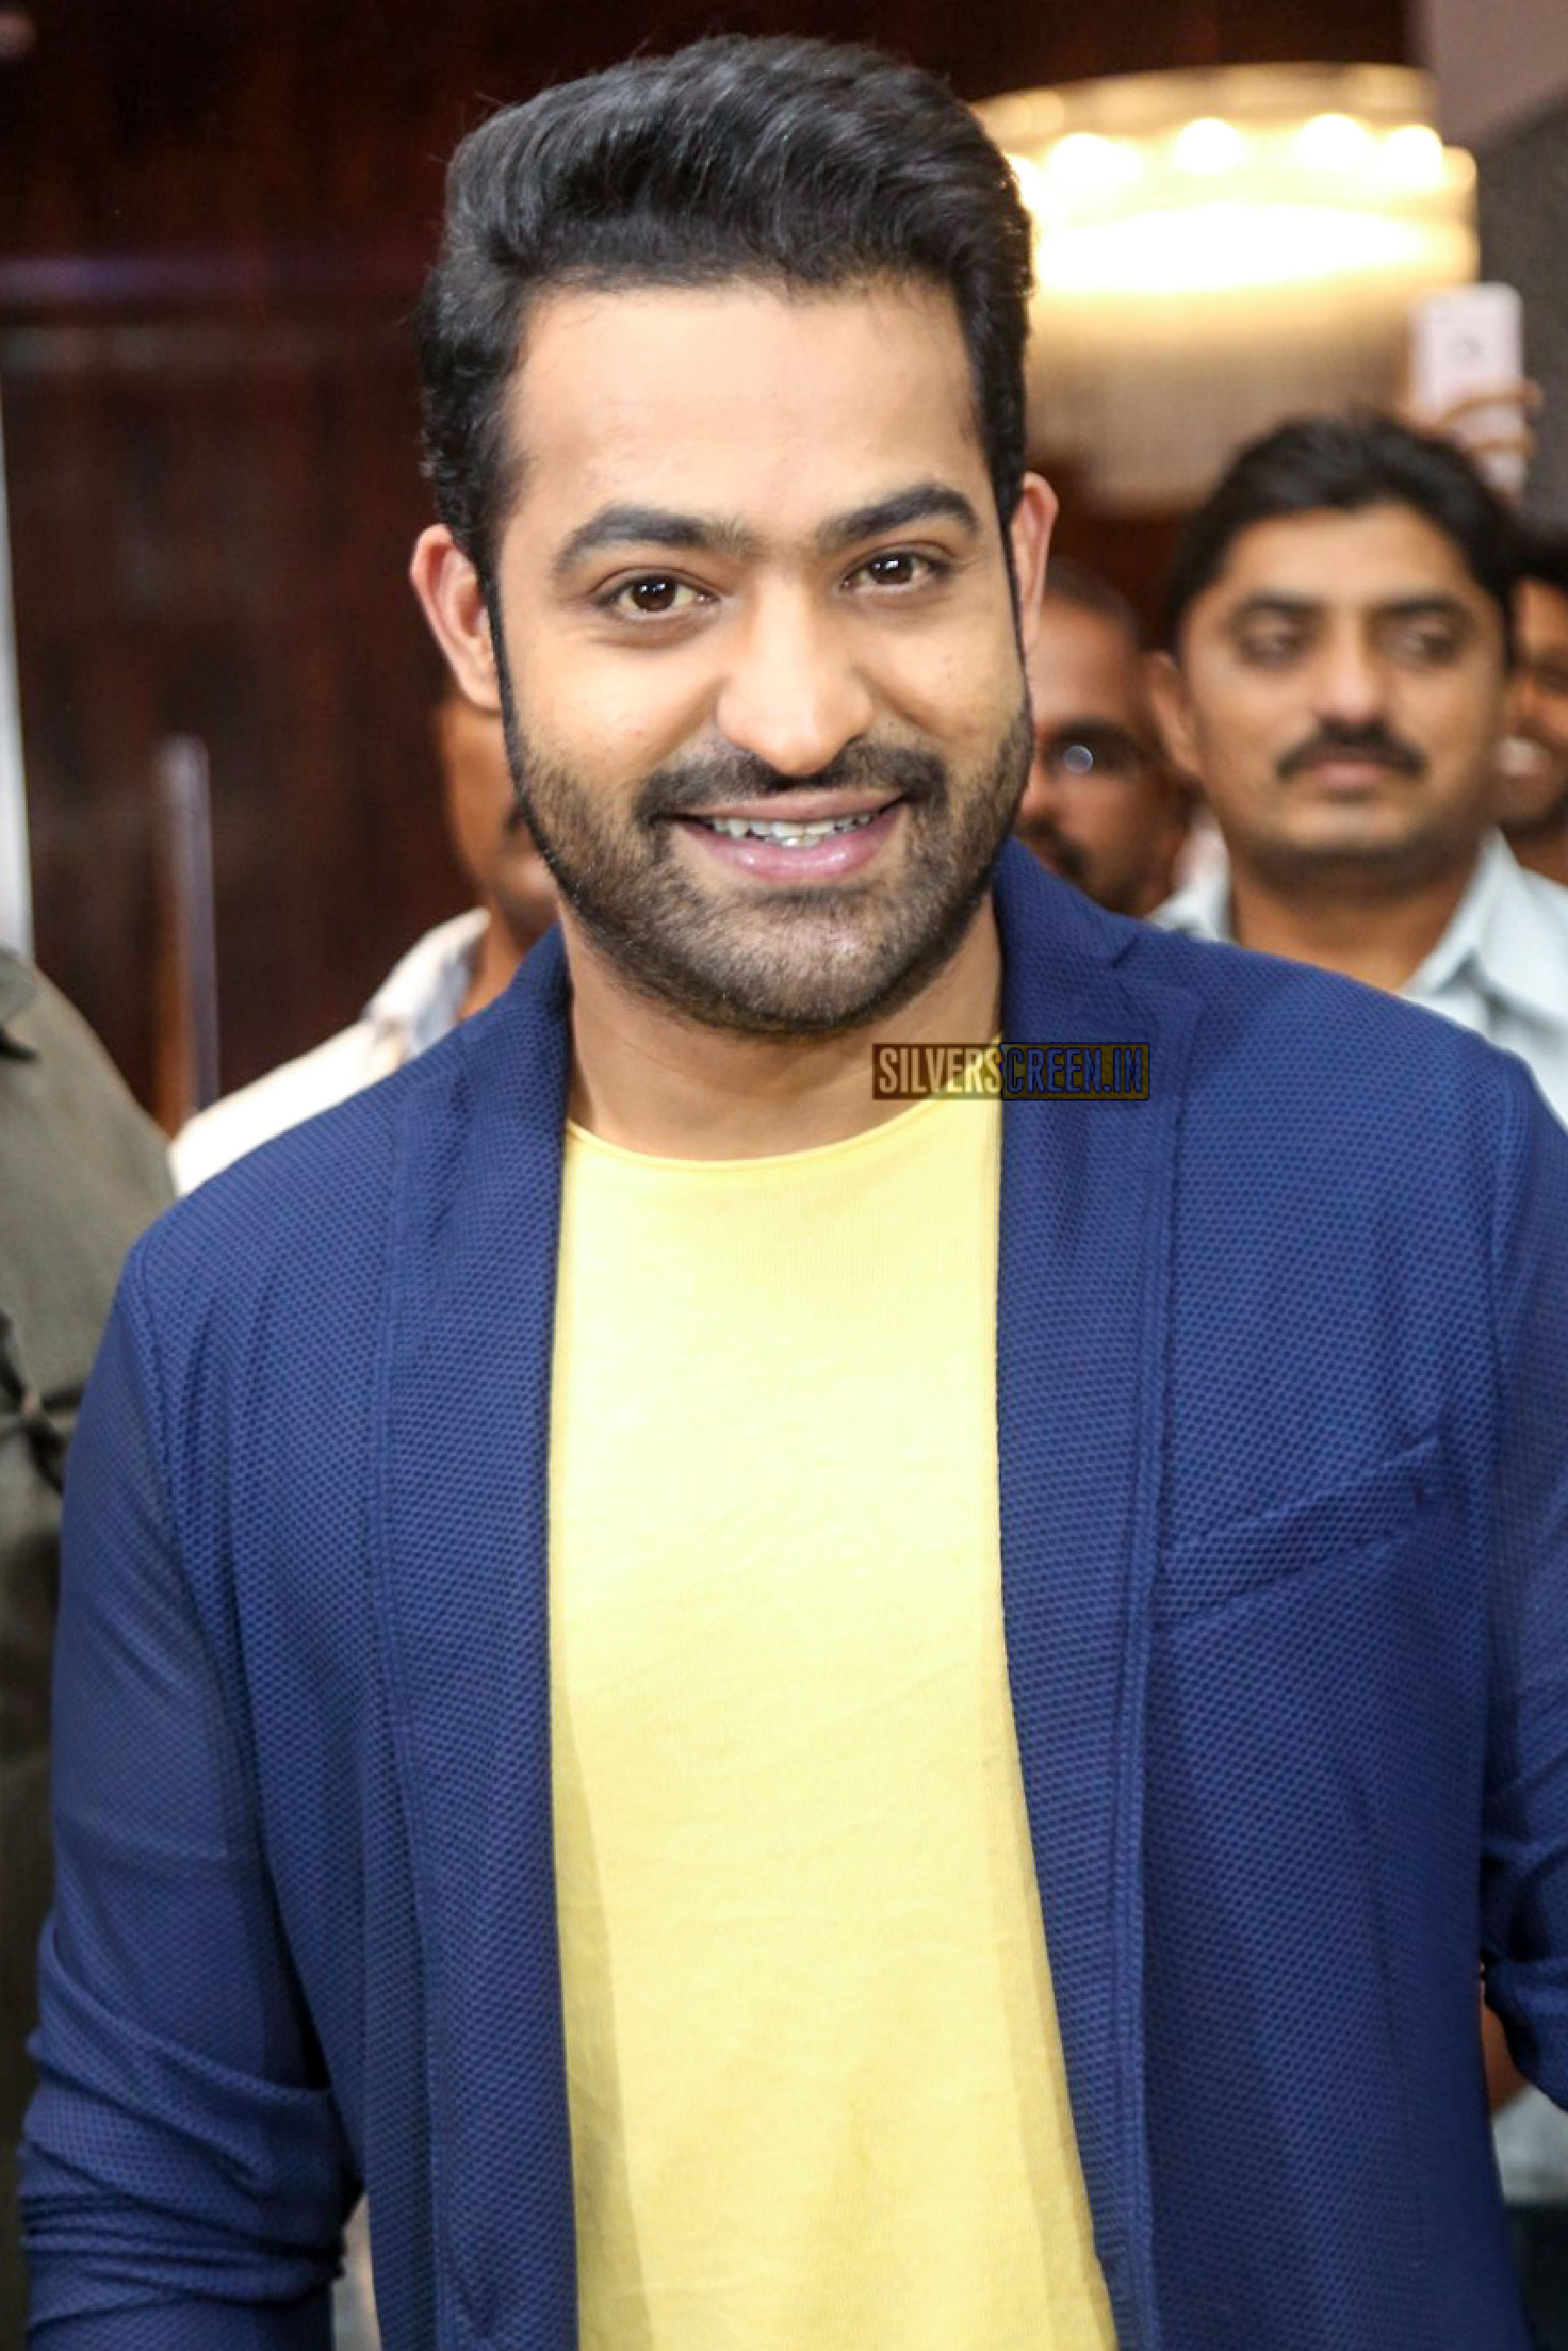 46+] NTR Wallpapers on WallpaperSafari | New movie images, New photos hd,  New images hd